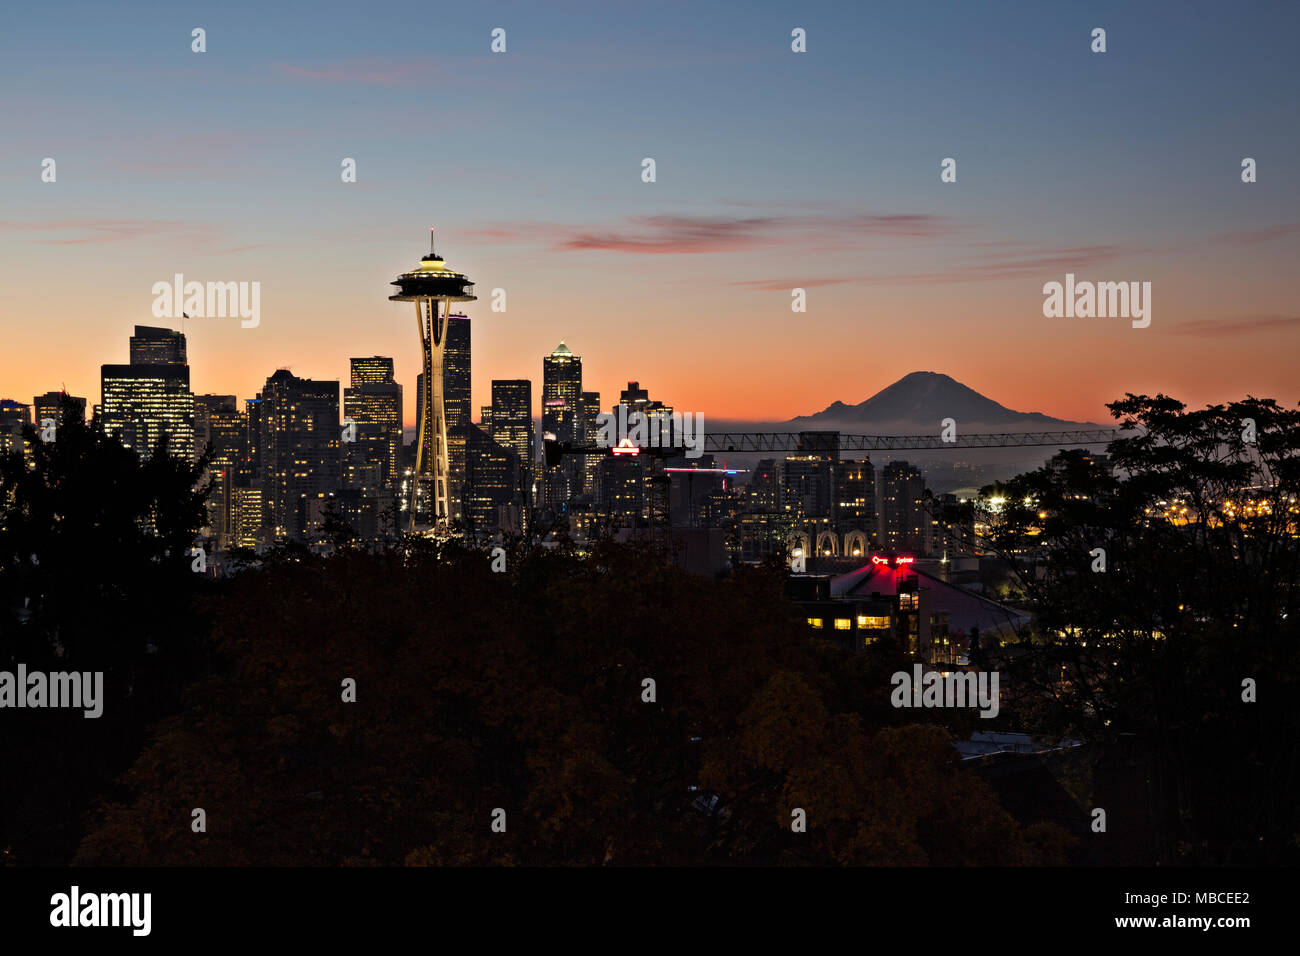 WA15083-00...WASHINGTON - Sunrise over Seattle and Mount Rainier Kerry Park on Queen Anne Hill. 2017 Stock Photo